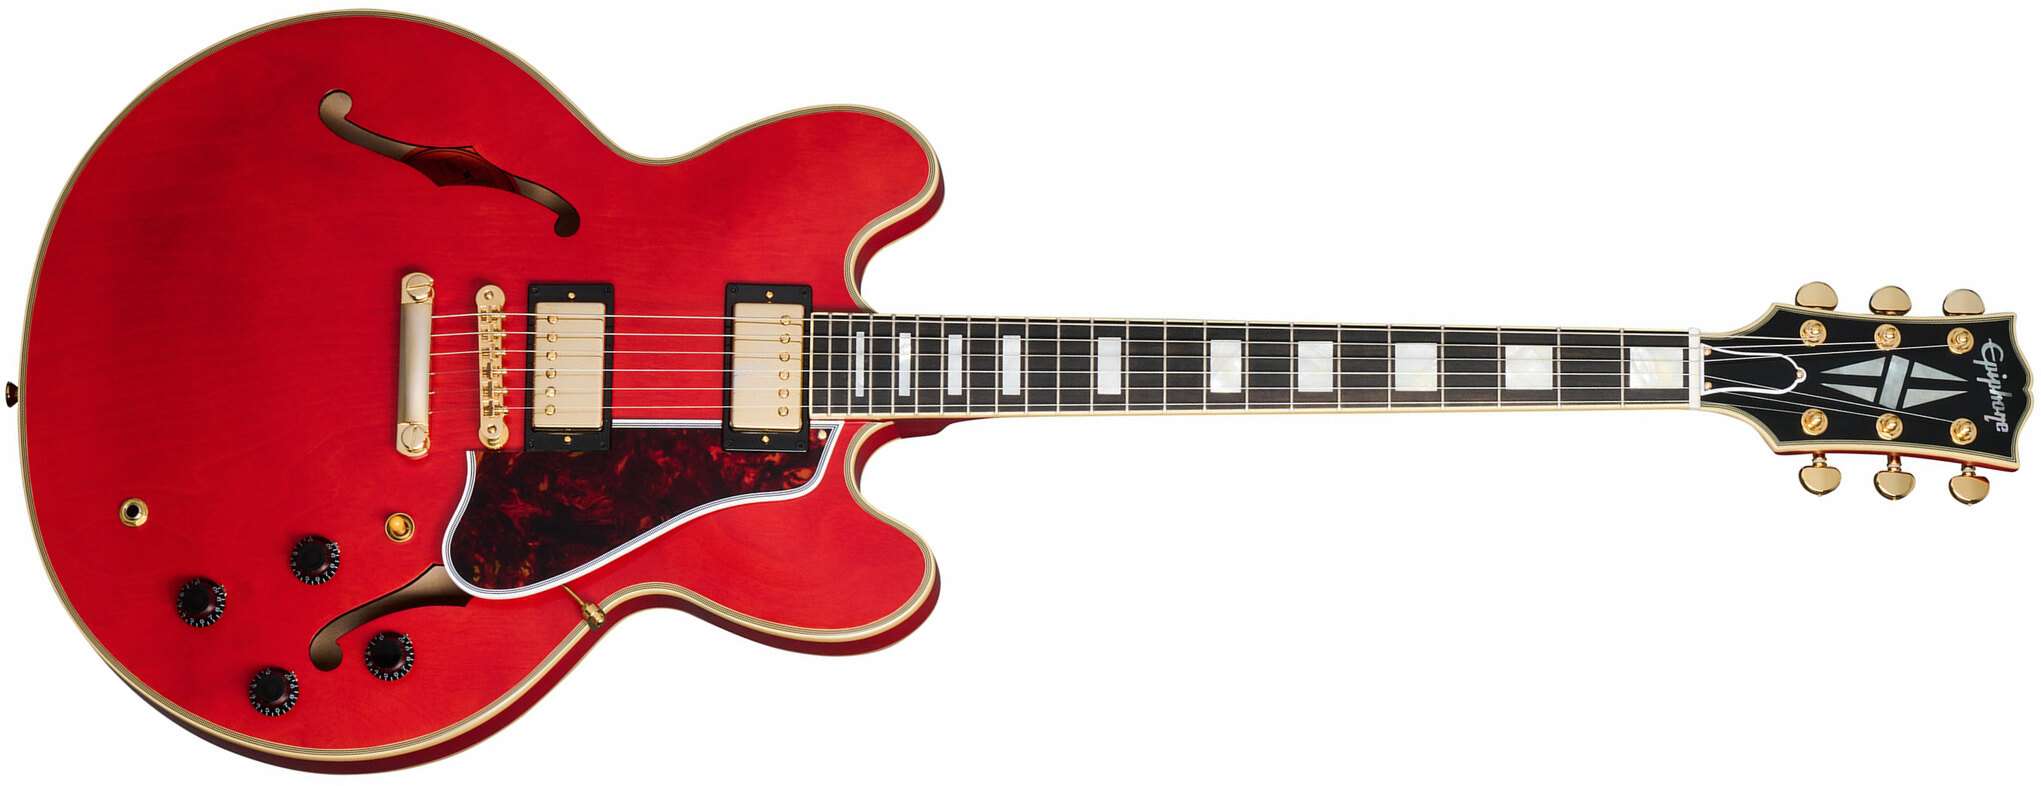 Epiphone Es355 1959 Inspired By 2h Gibson Ht Eb - Vos Cherry Red - Semi-Hollow E-Gitarre - Main picture